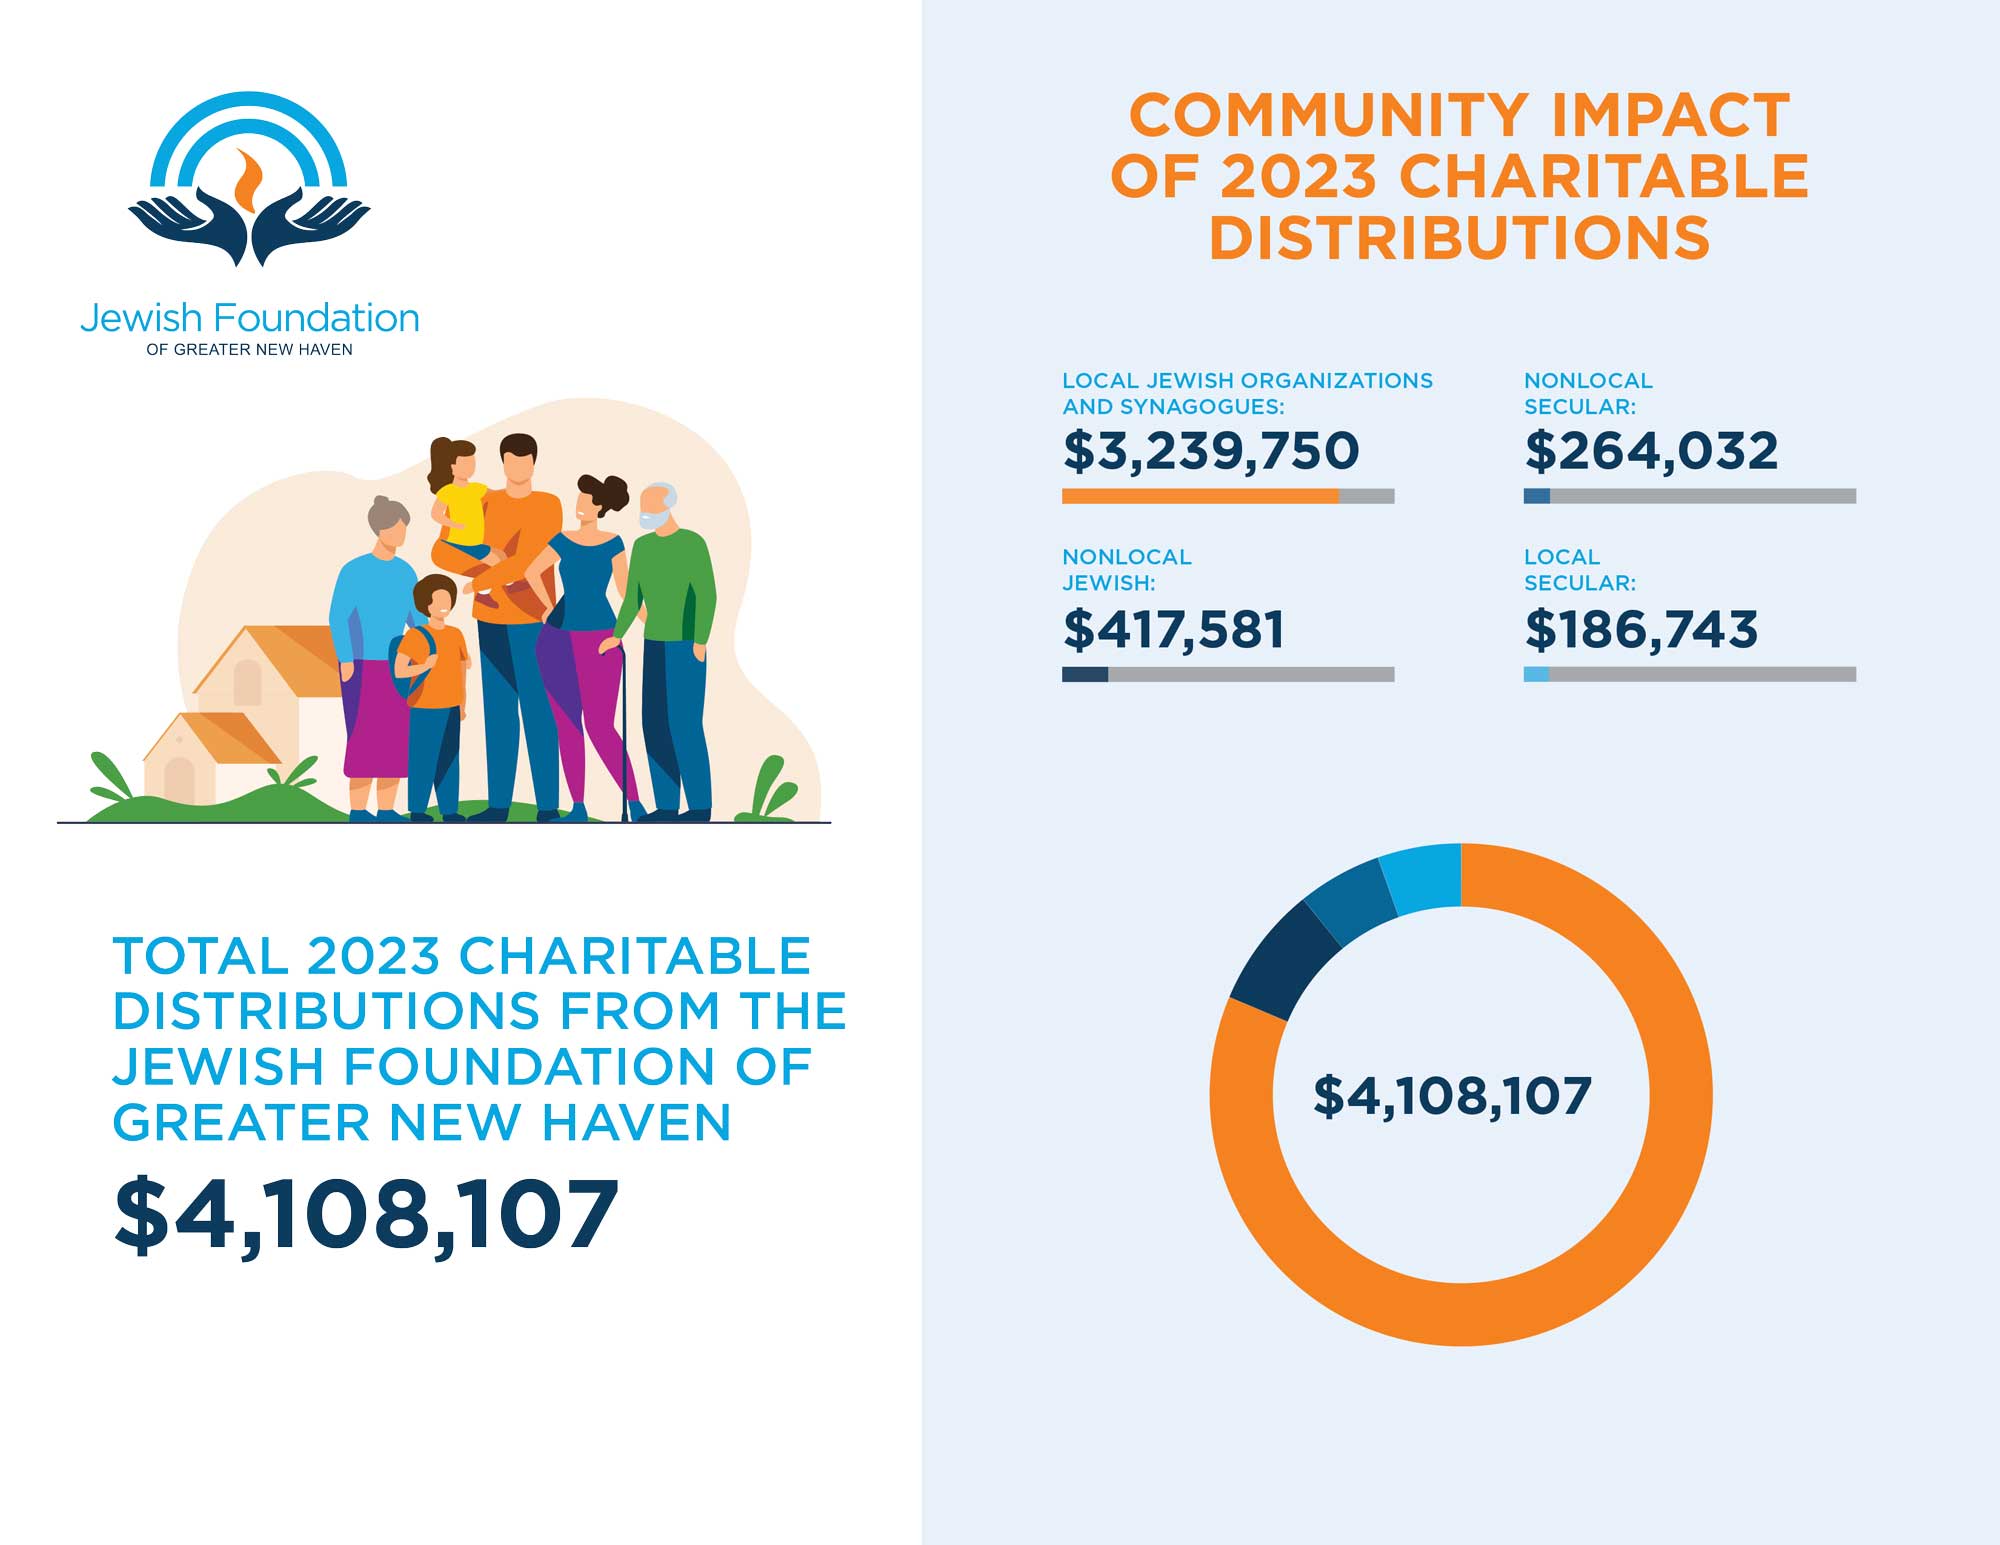 Pie chart showing community impact of 2022 charitable distributions